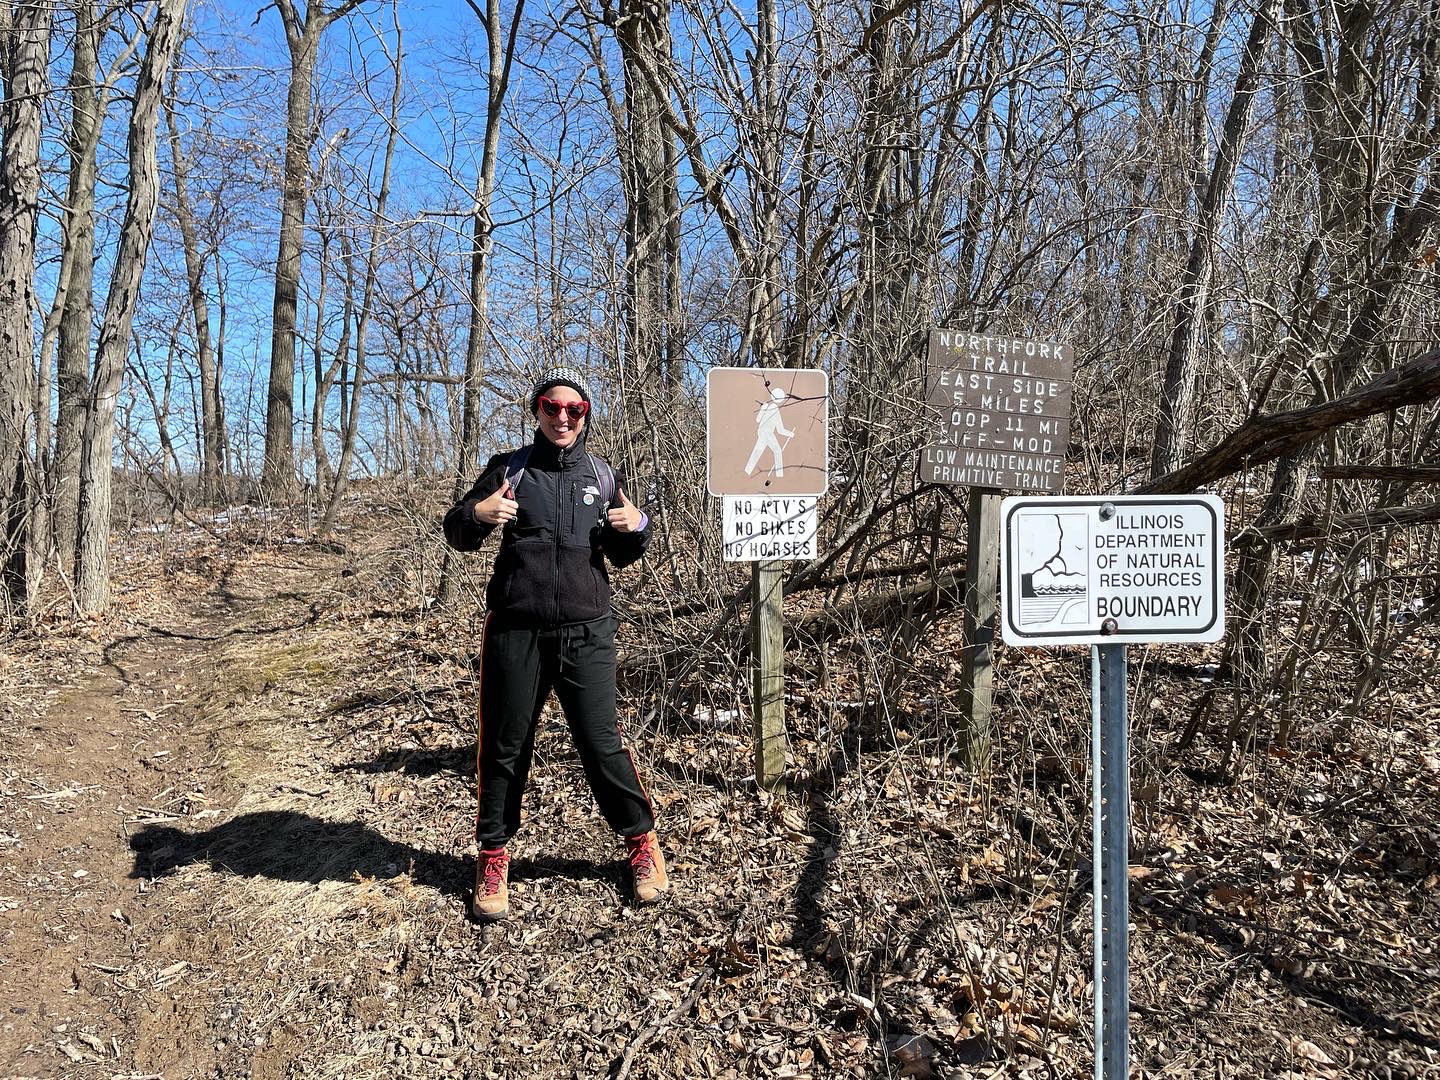 Photograph of author Mara Thacker standing next to three signs indicating the trailhead for the North Fork Trail. There are trees in the background, colors are mostly brown with a blue sky in the background.